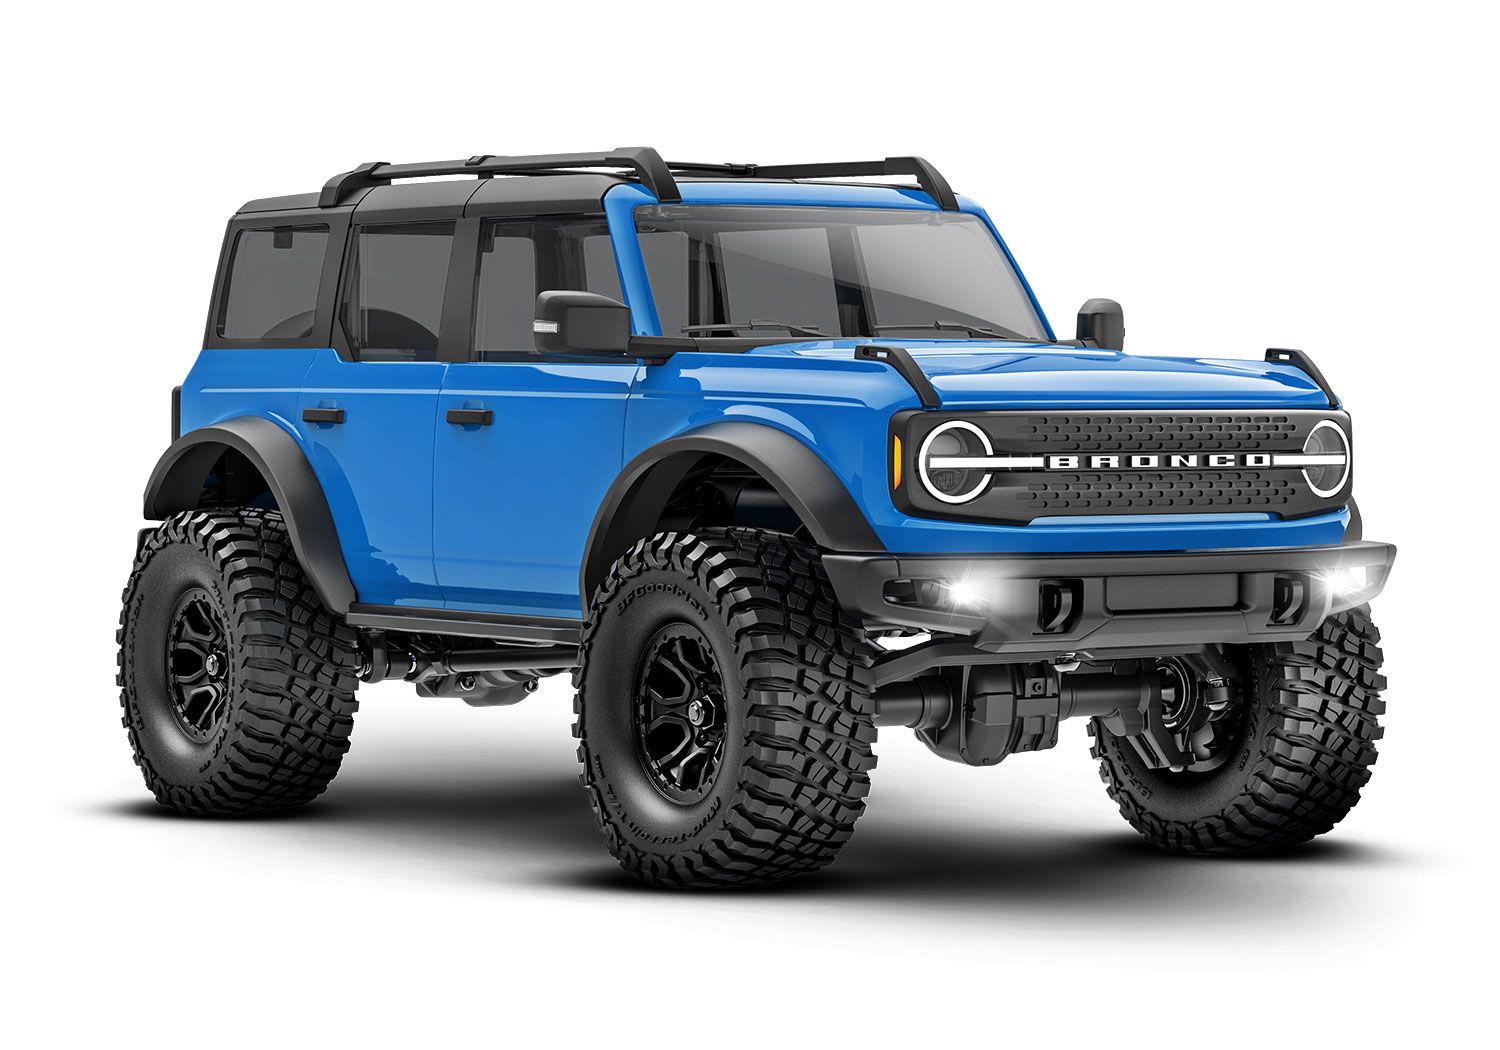 TRX-4M Ford Bronco Traxxas 97074-1 This item is only available for in-store pick-up and cannot be shipped